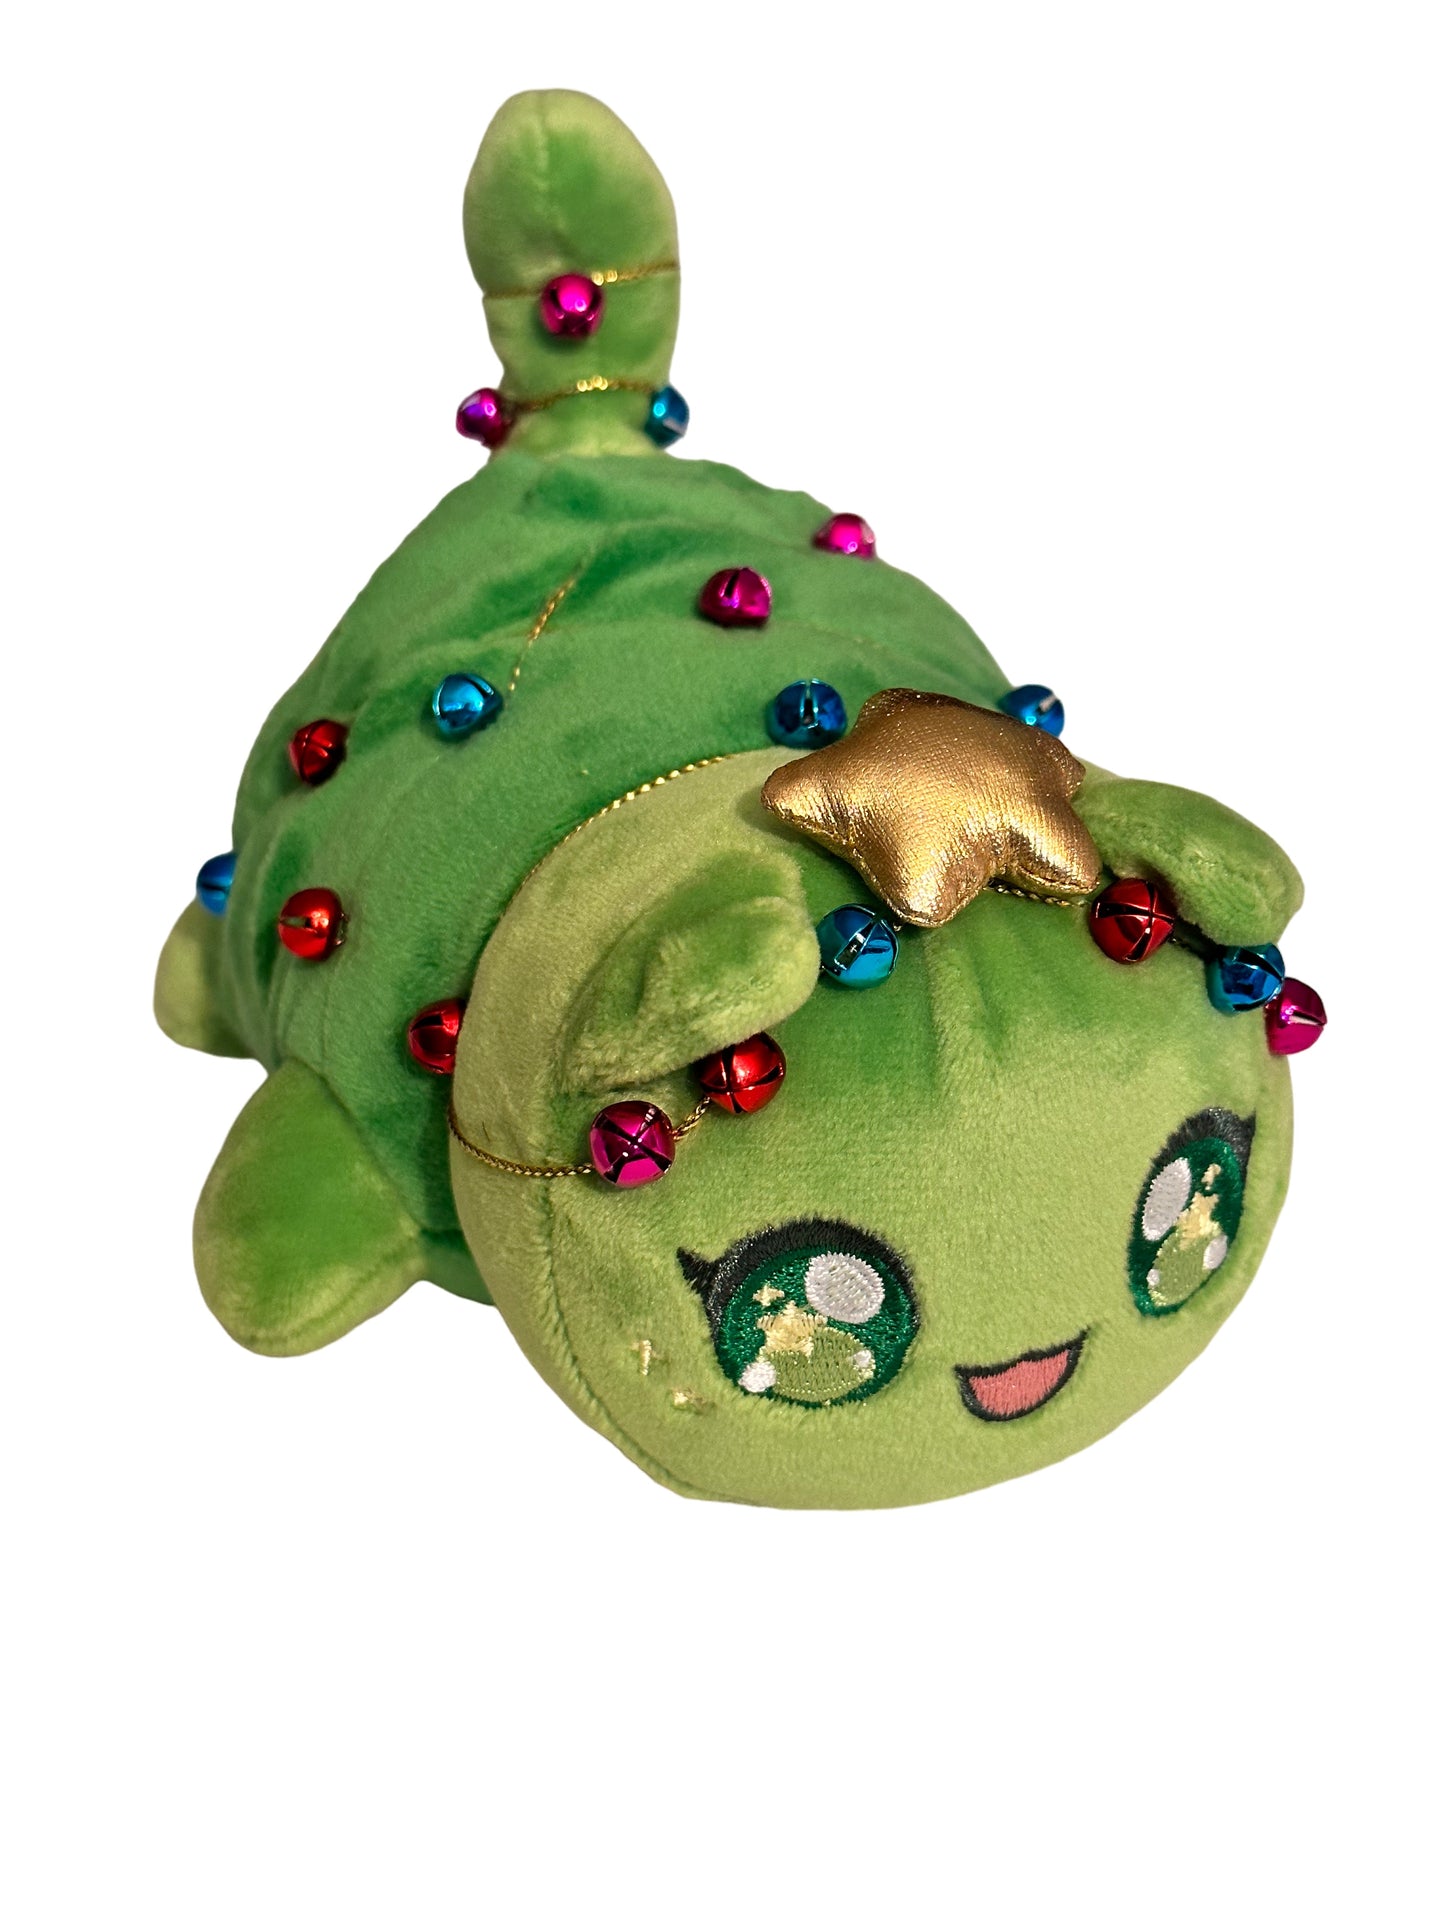 CHRISTMAS TREE CAT - HAPPY Holidays Mystery Egg (NEW) Exclusive Kitty Plush!